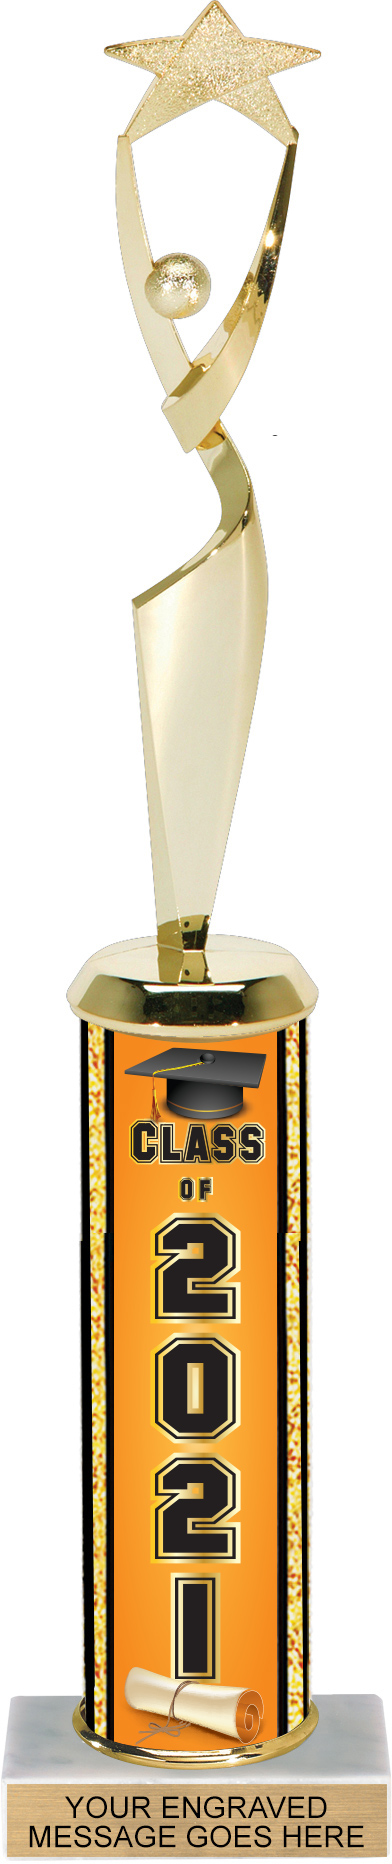 Class of 2021 Exclusive Column Trophy - 12 inch